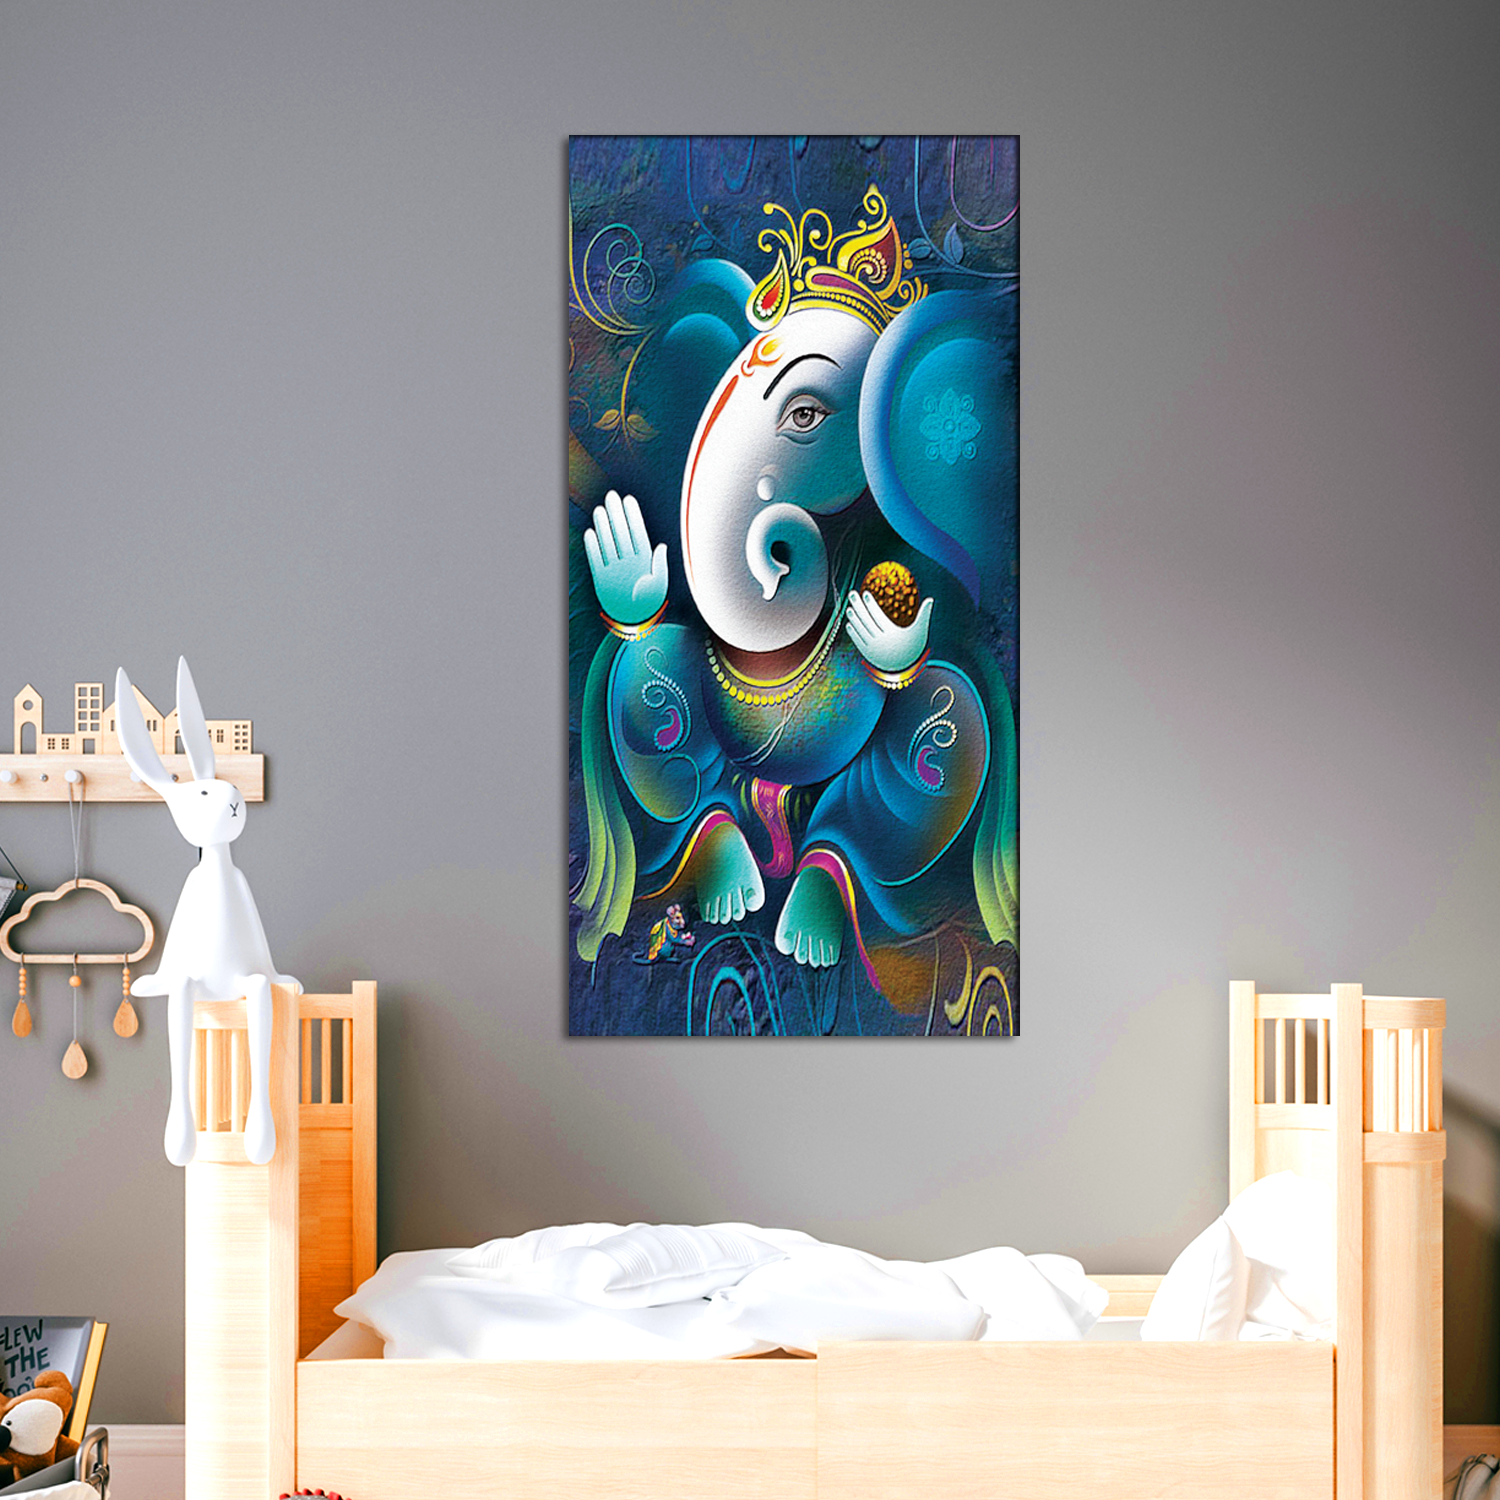 Wall Painting Canvas of Lord Ganesha for Room Decor